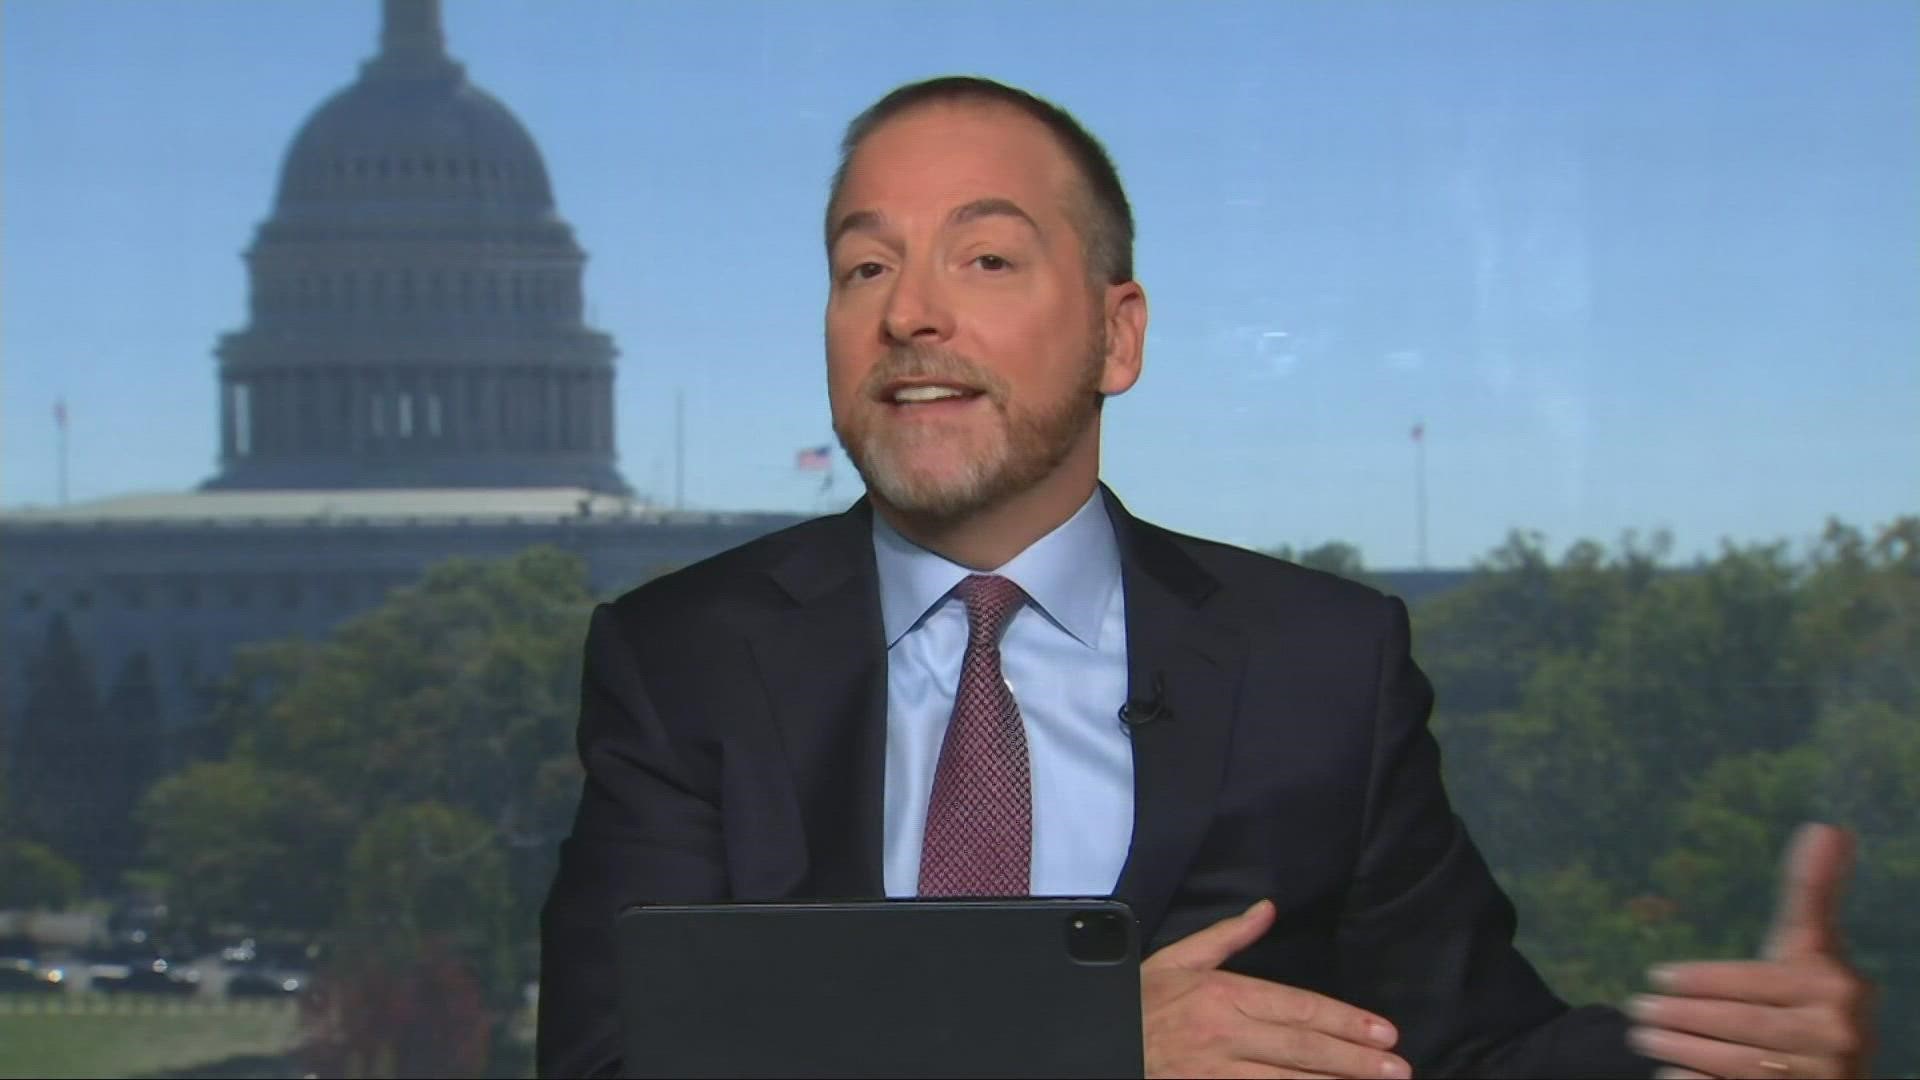 NBC's Chuck Todd gave insight to 3News' Isabel Lawrence about which races could impact the state in the future.